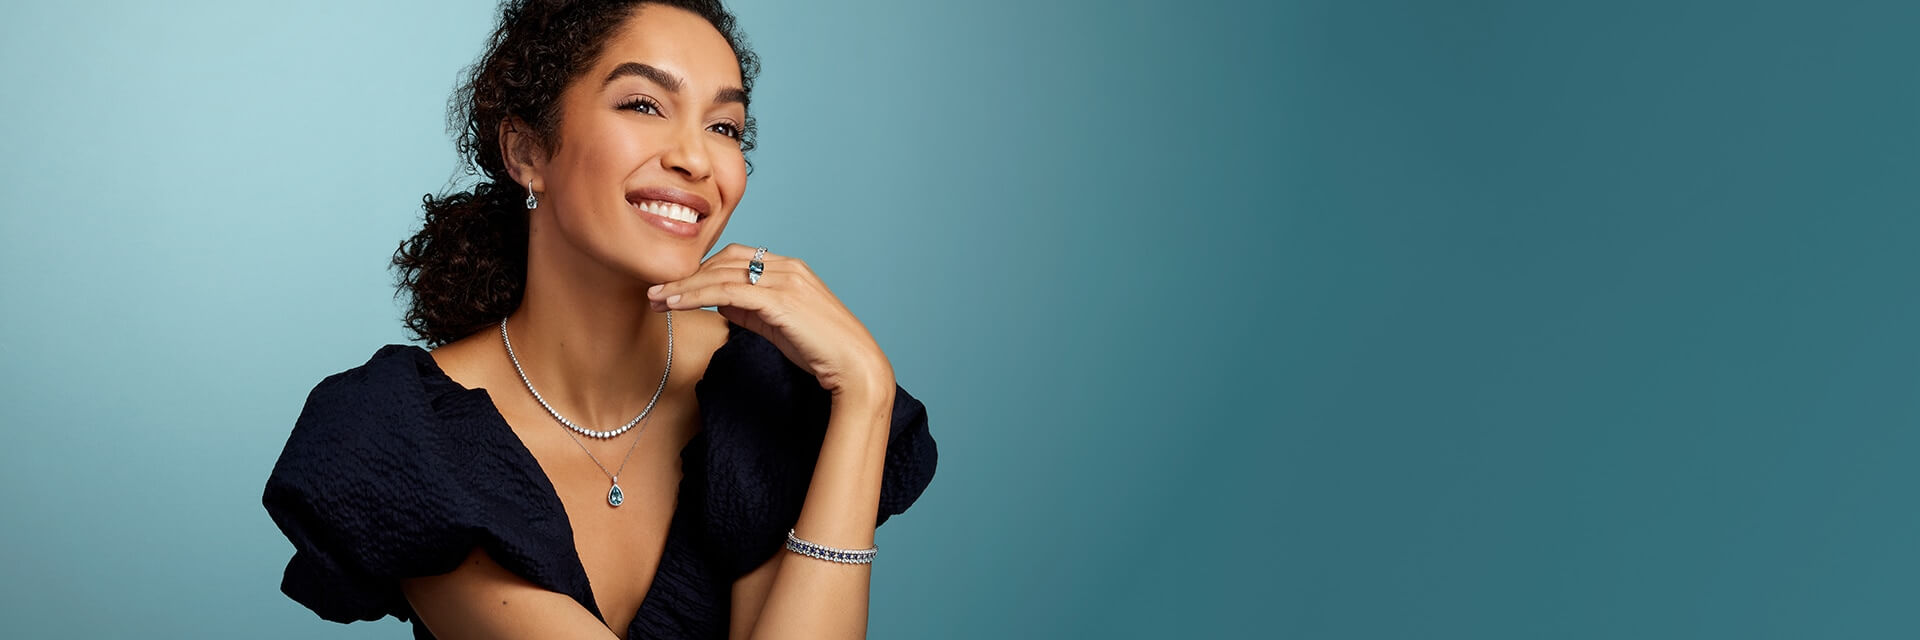 Woman smiling in gold jewelry with diamonds and blue topaz gemstones.